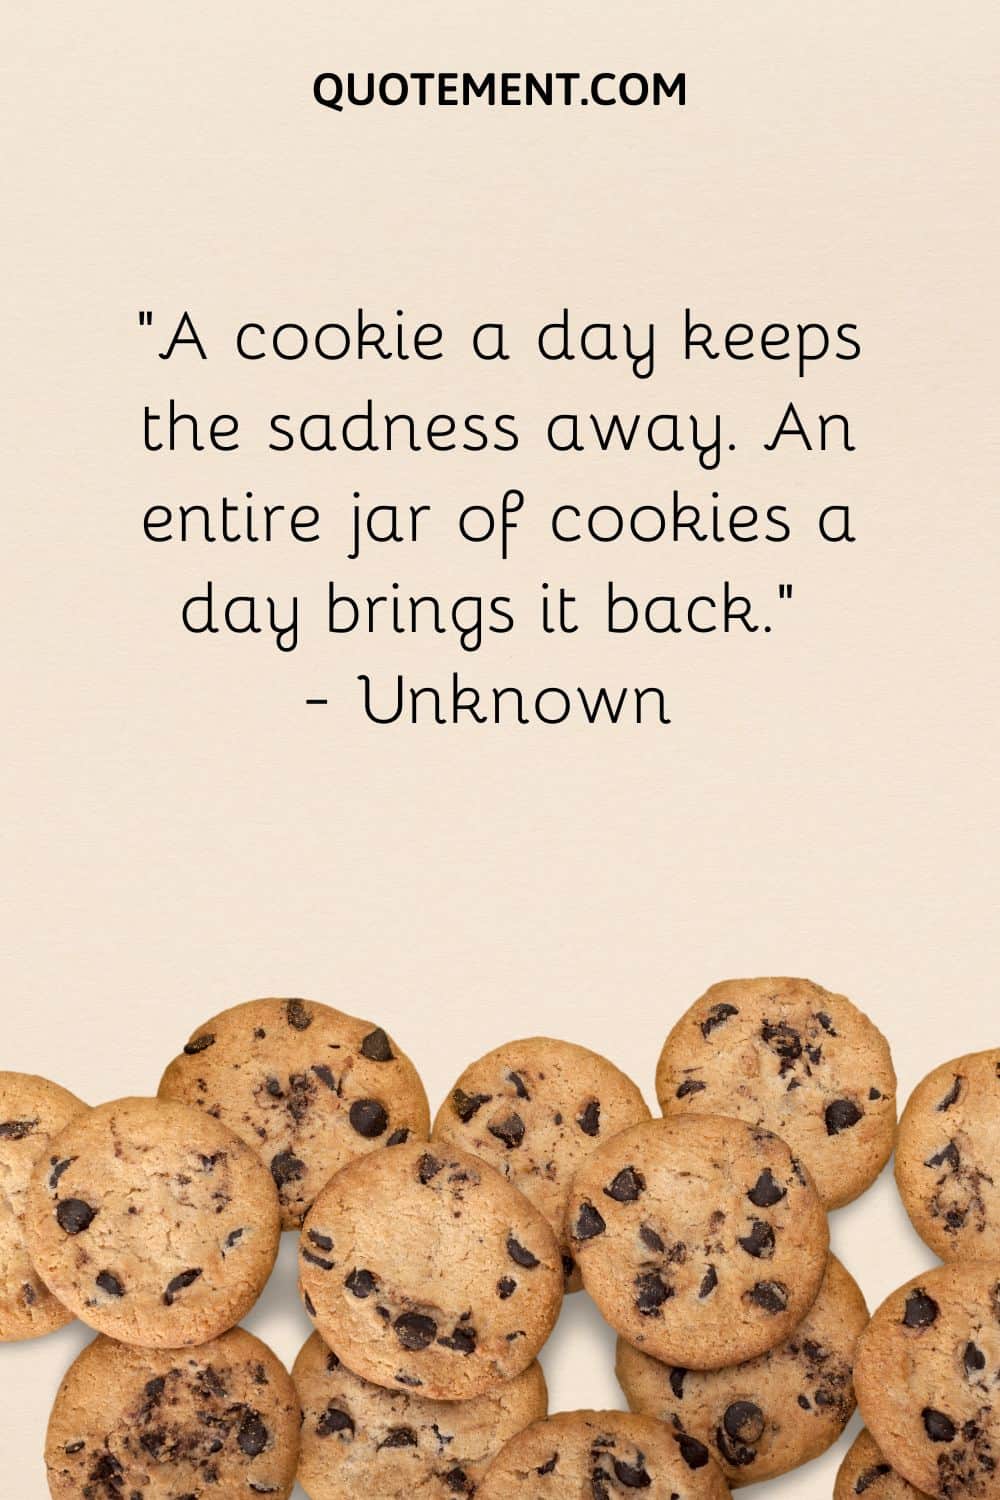 A cookie a day keeps the sadness away